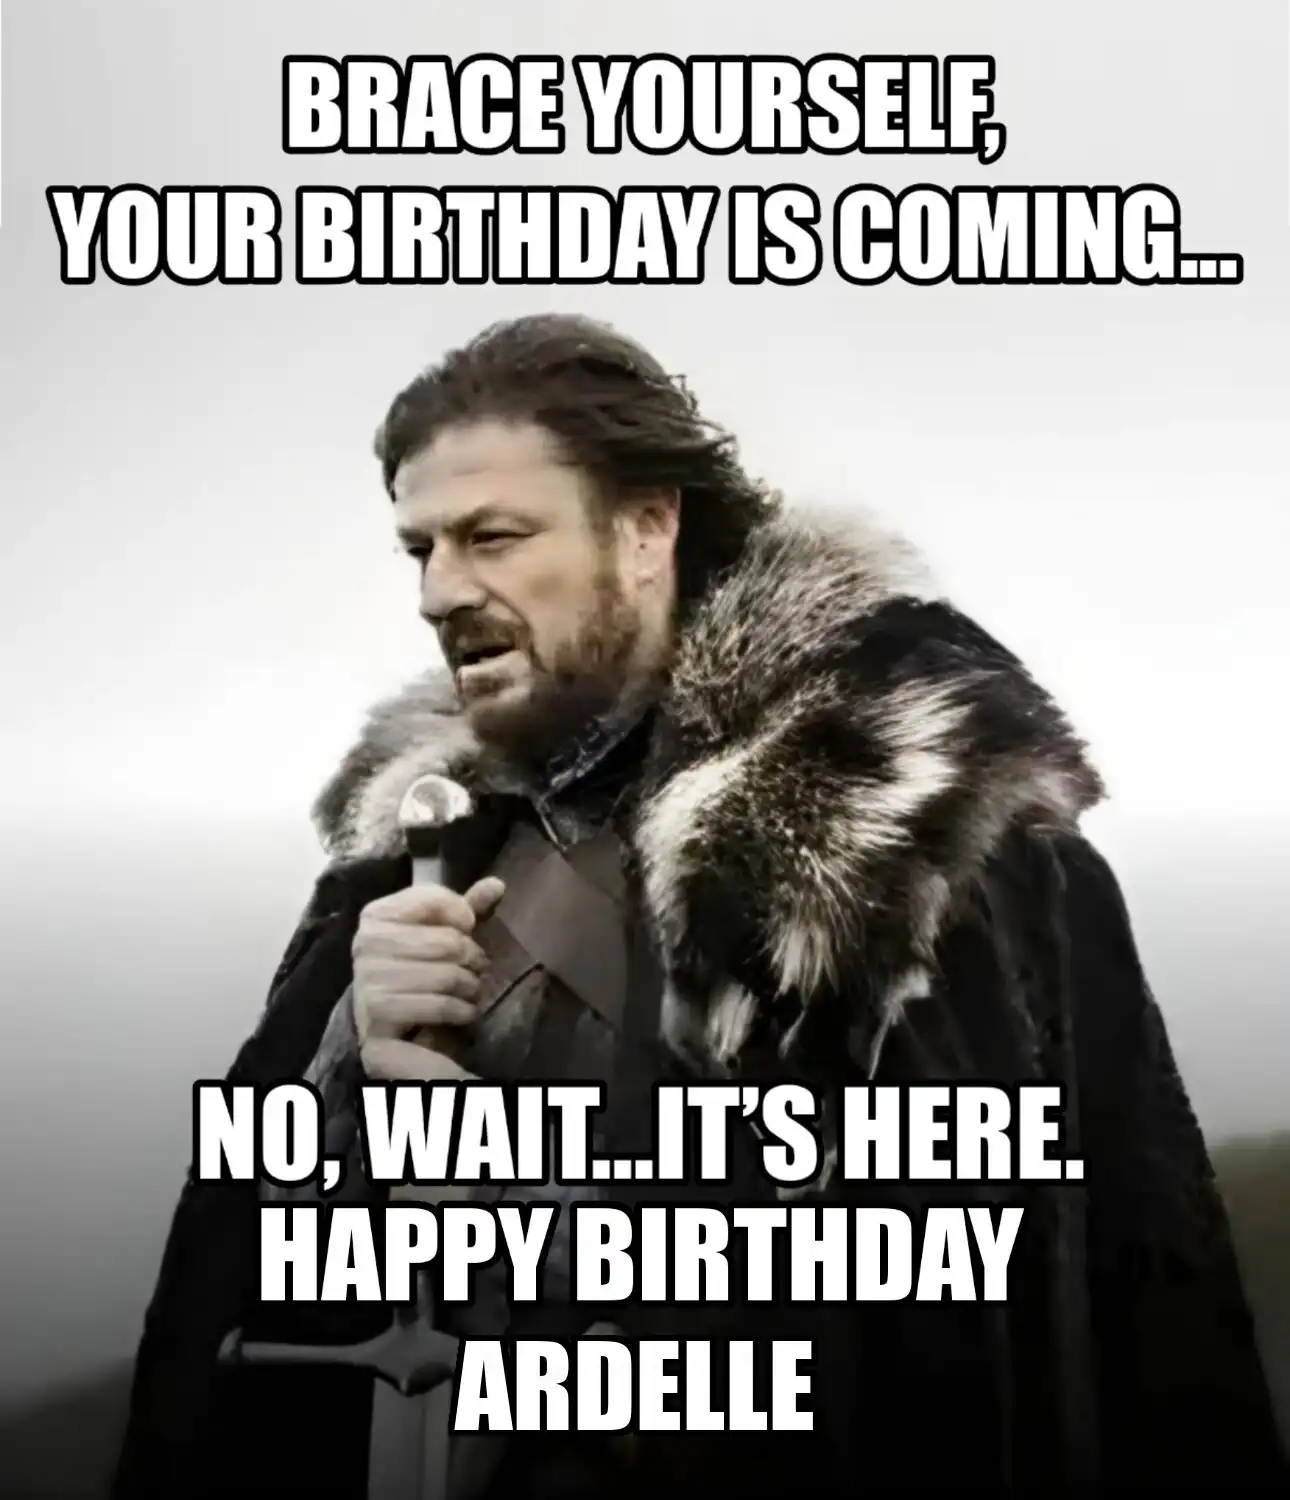 Happy Birthday Ardelle Brace Yourself Your Birthday Is Coming Meme